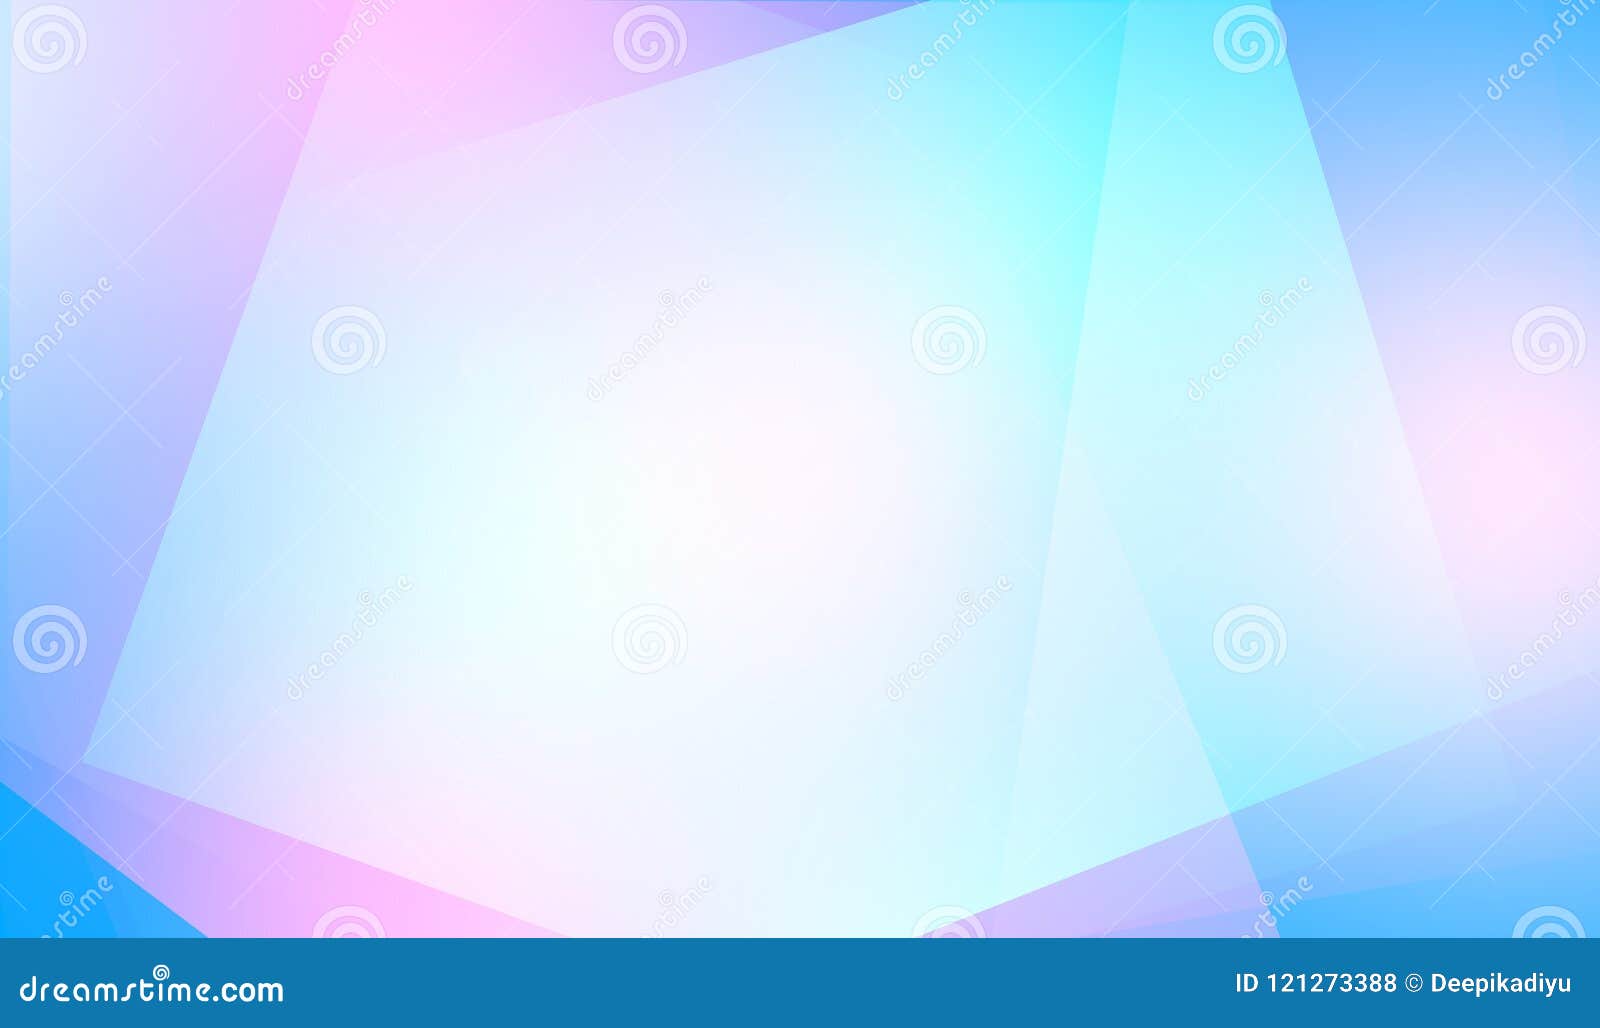 Light-color-blue-abstract-simple-background Stock Illustration ...